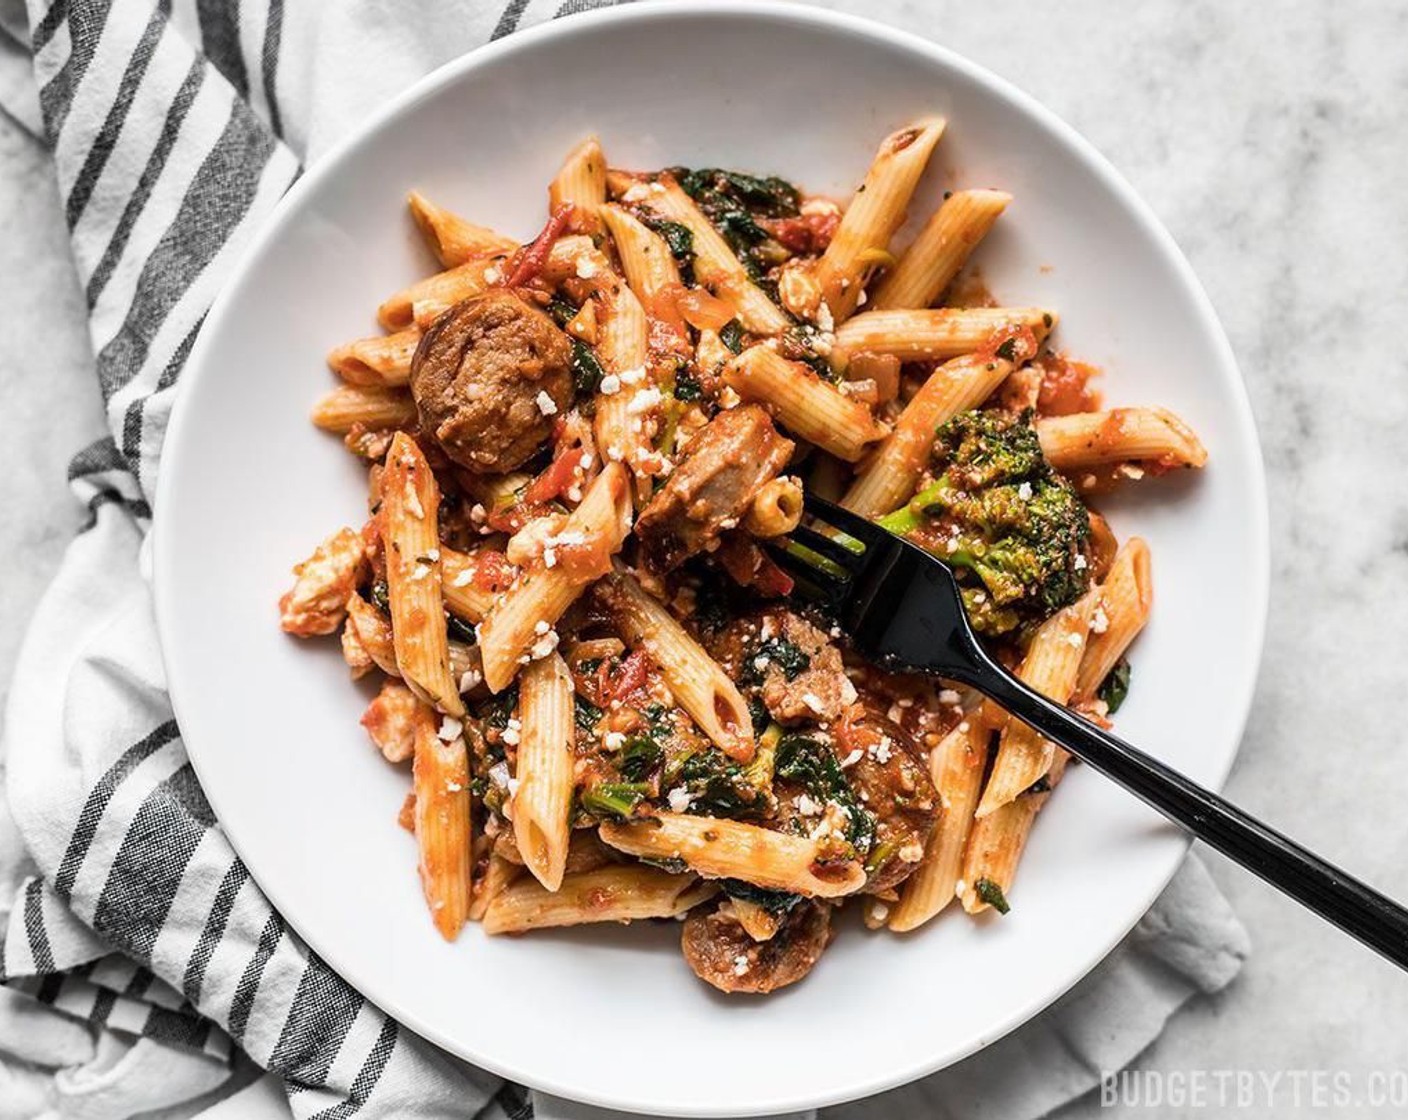 Penne Pasta with Sausage and Greens